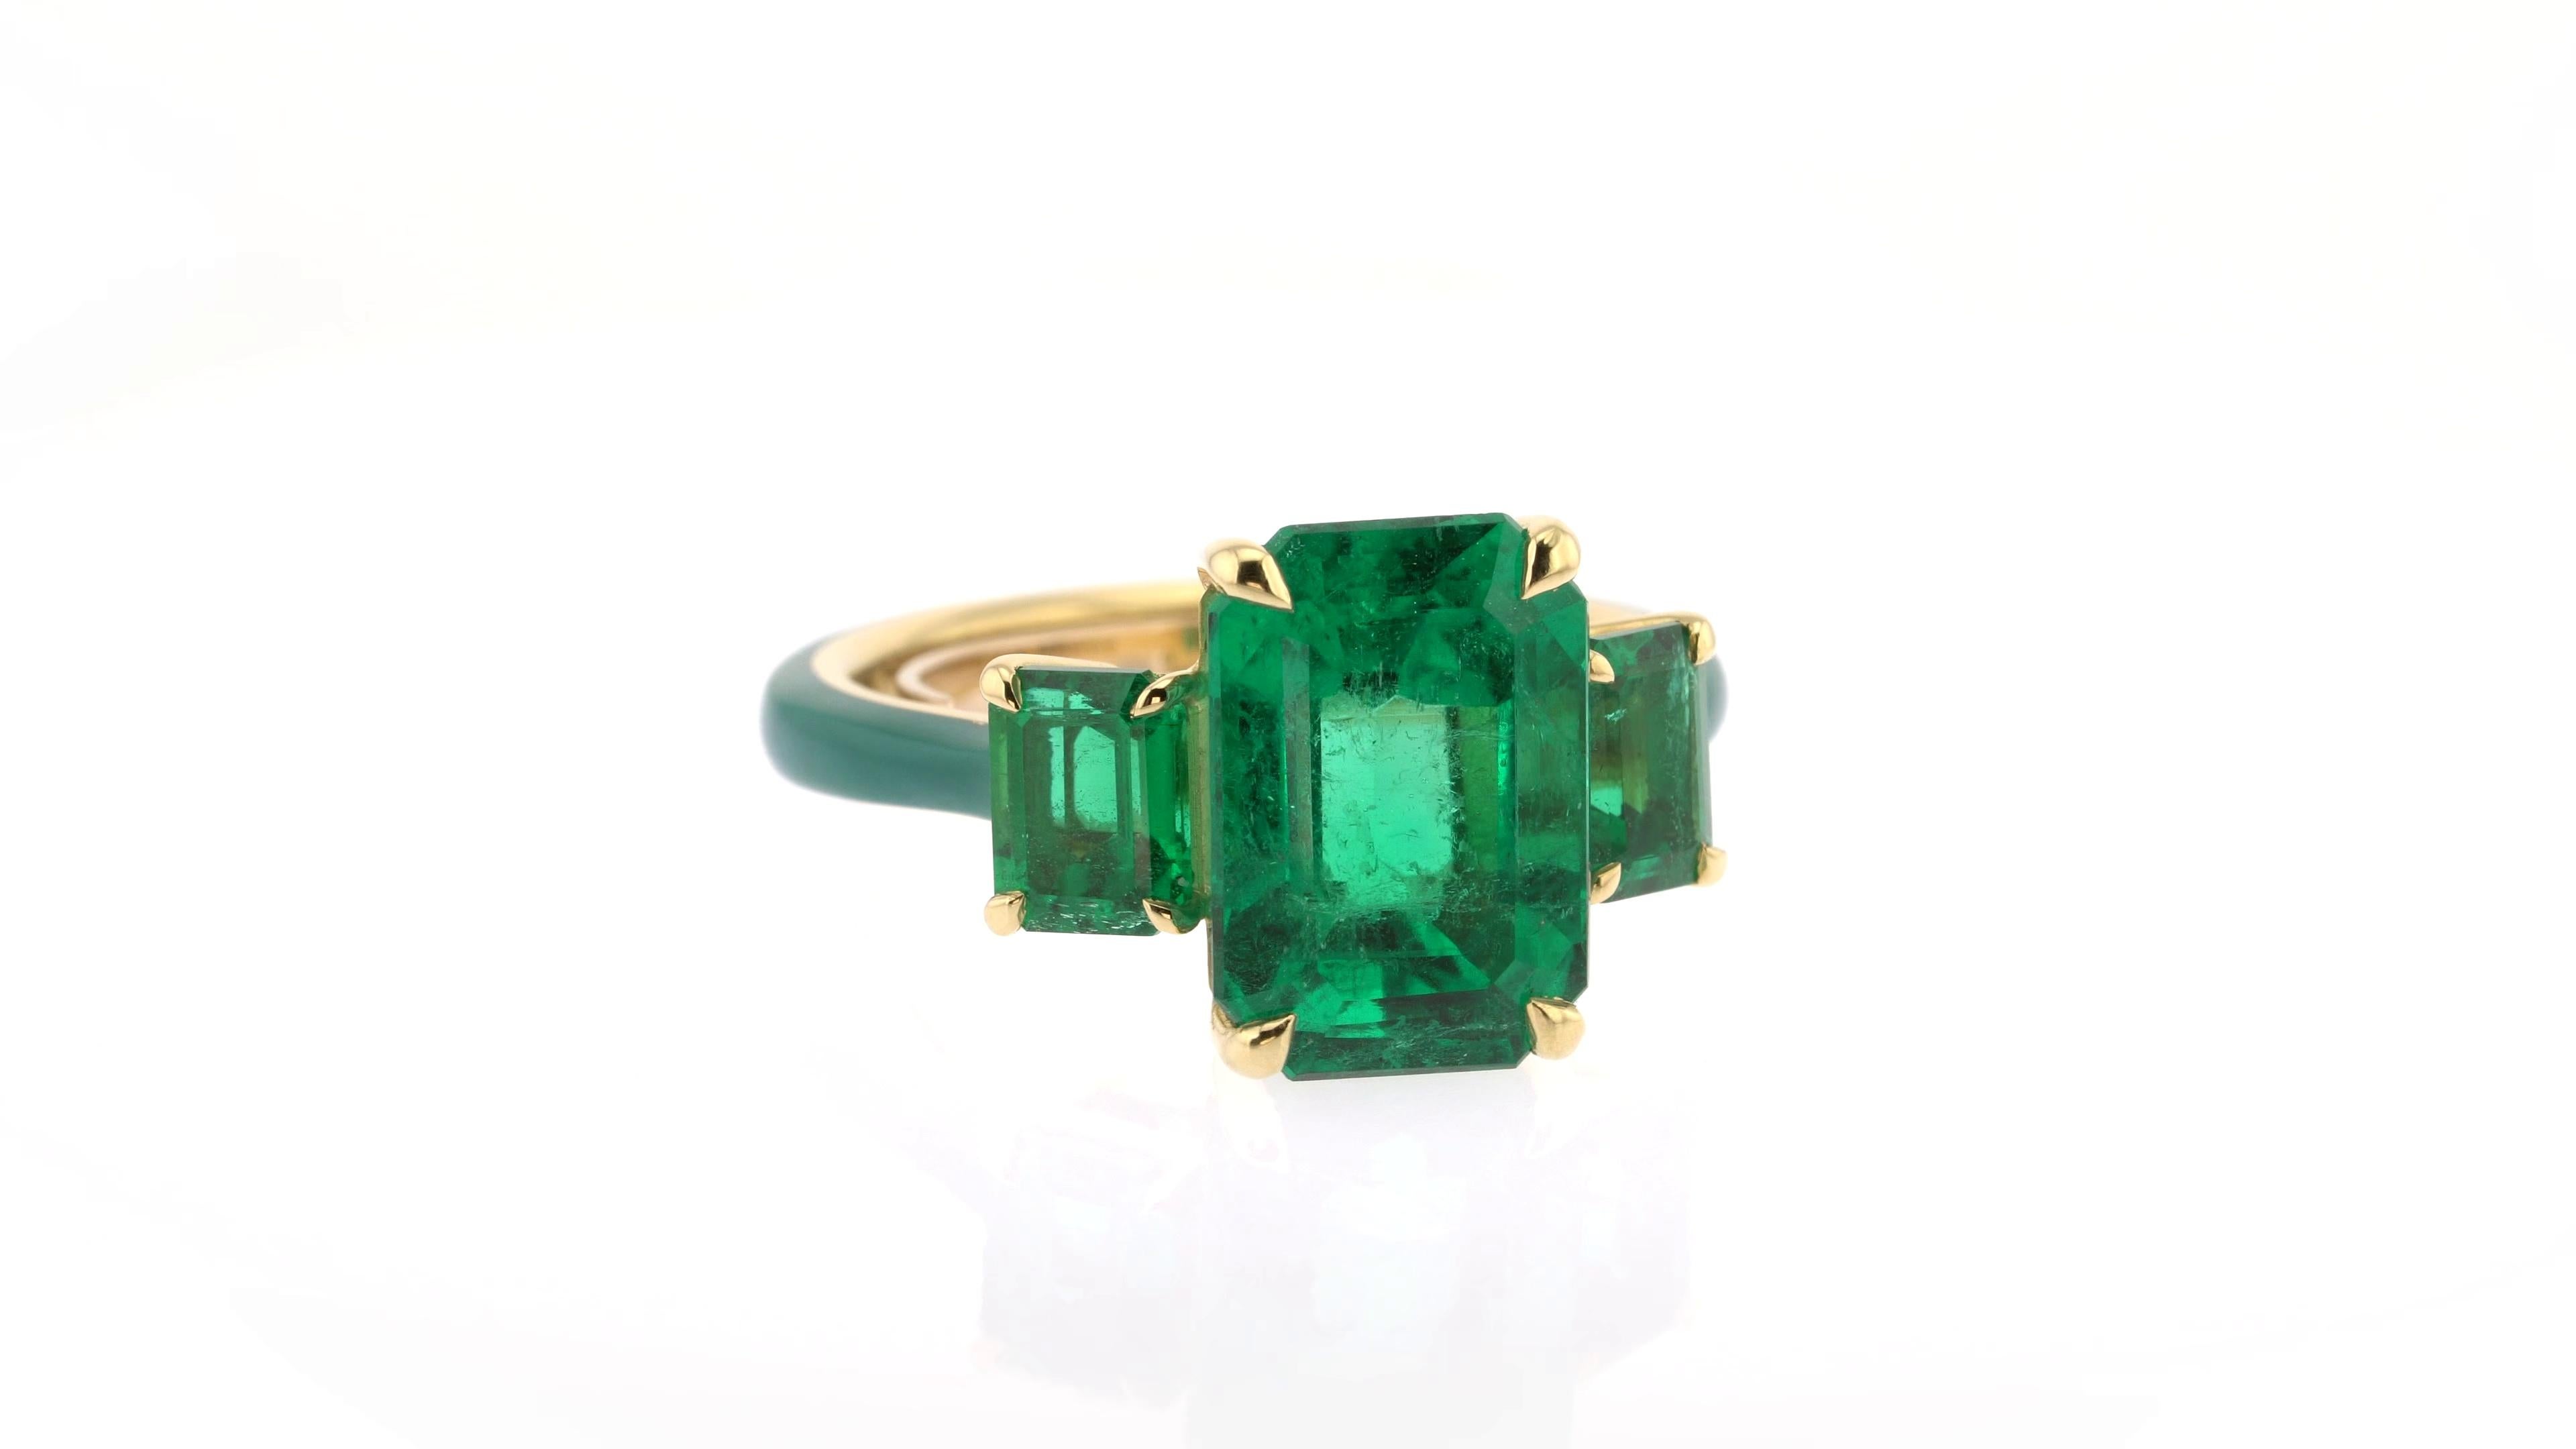 Contemporary 5.29 Carats Emerald Ring in Yellow Gold with Ceramic Detail